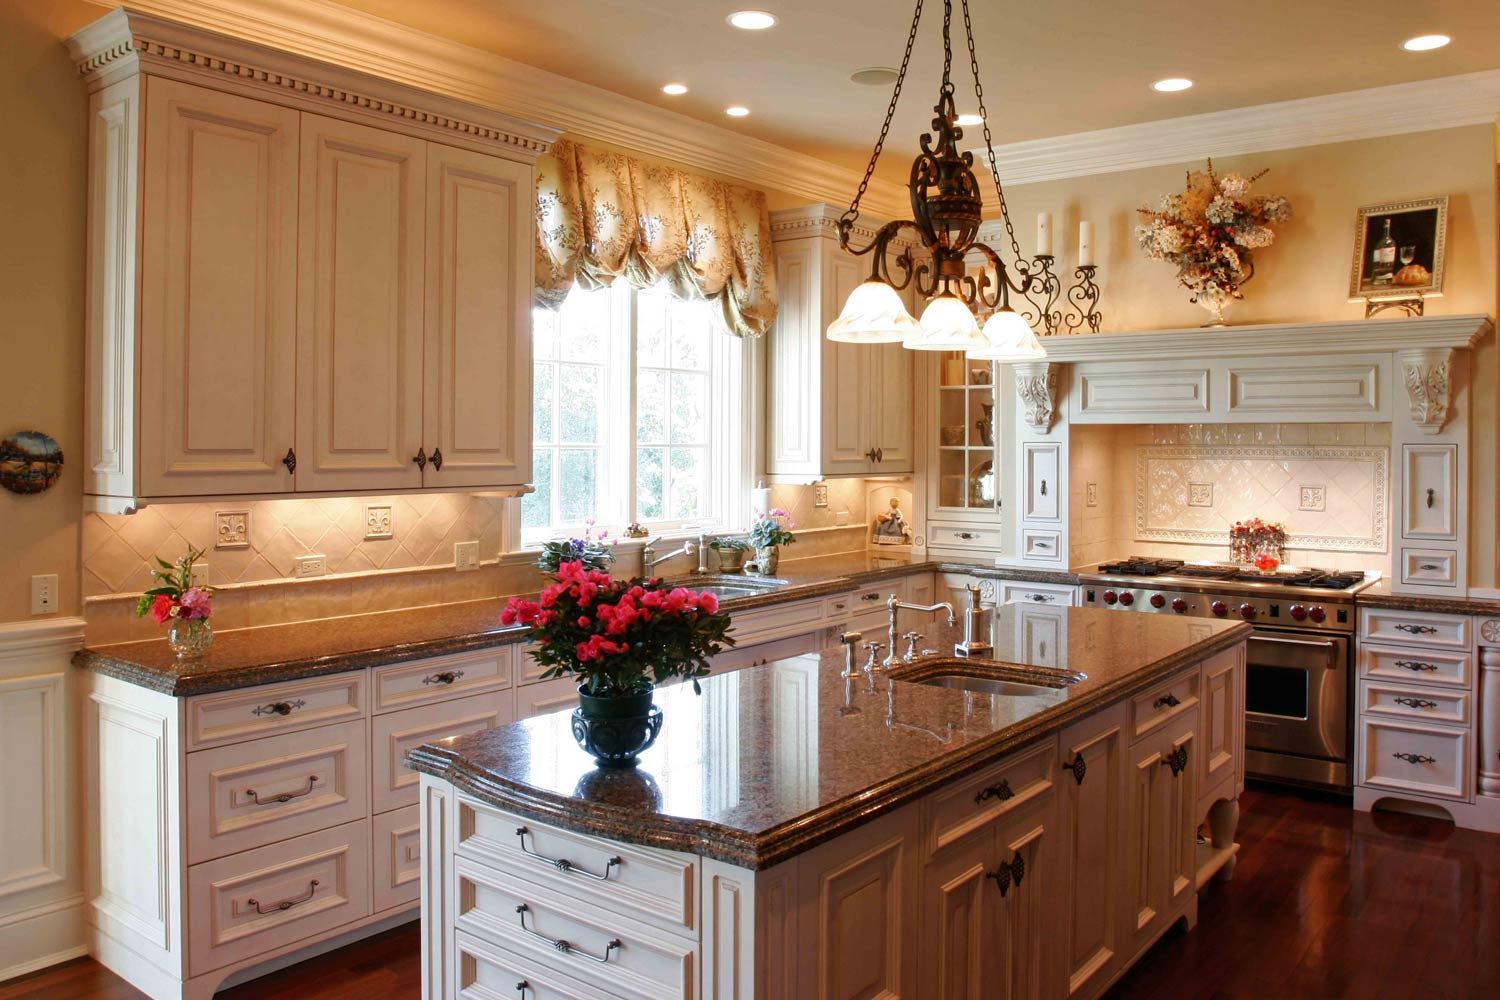 8-French-kitchen-with-ornamentation-and-french-hardware,-curtains-and-chandelier